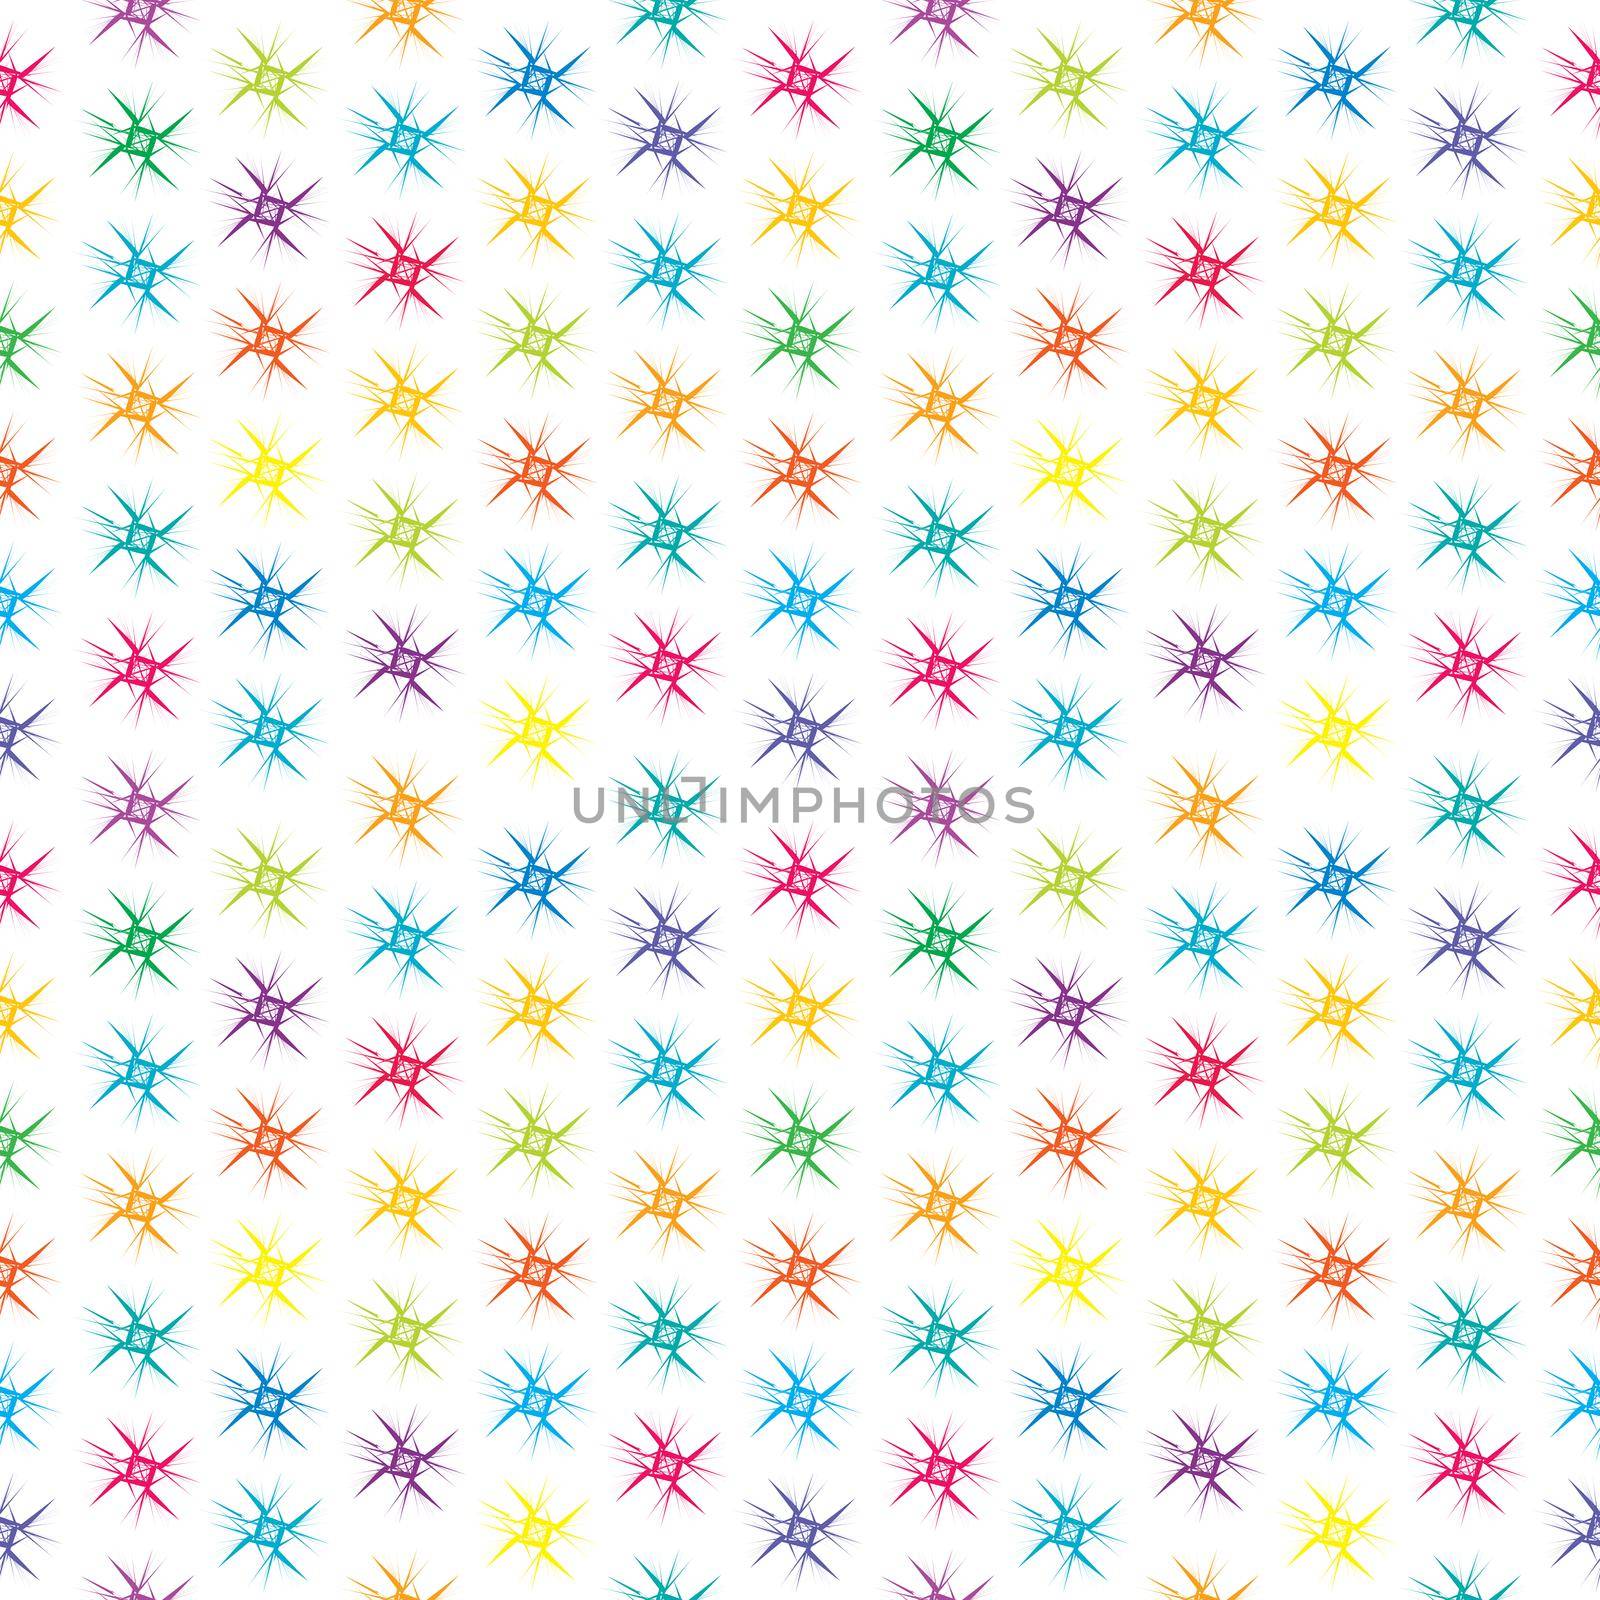 Colorful seamless background with rows of flowers in polka dot style by hibrida13